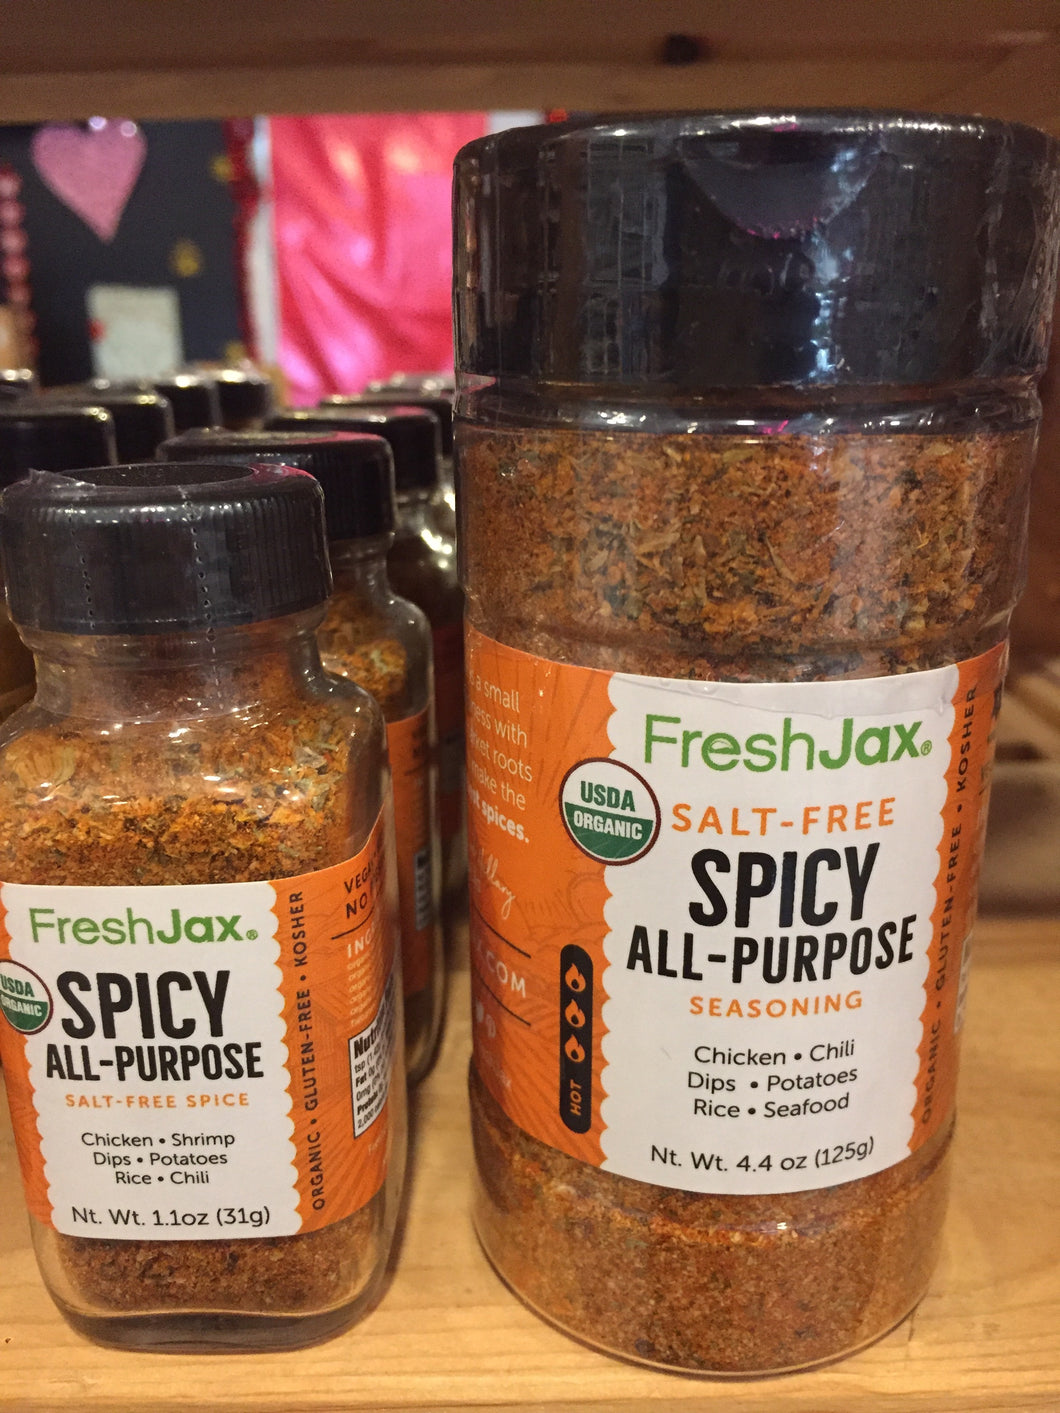 Spicy All-Purpose: FreshJax at Hoby’s